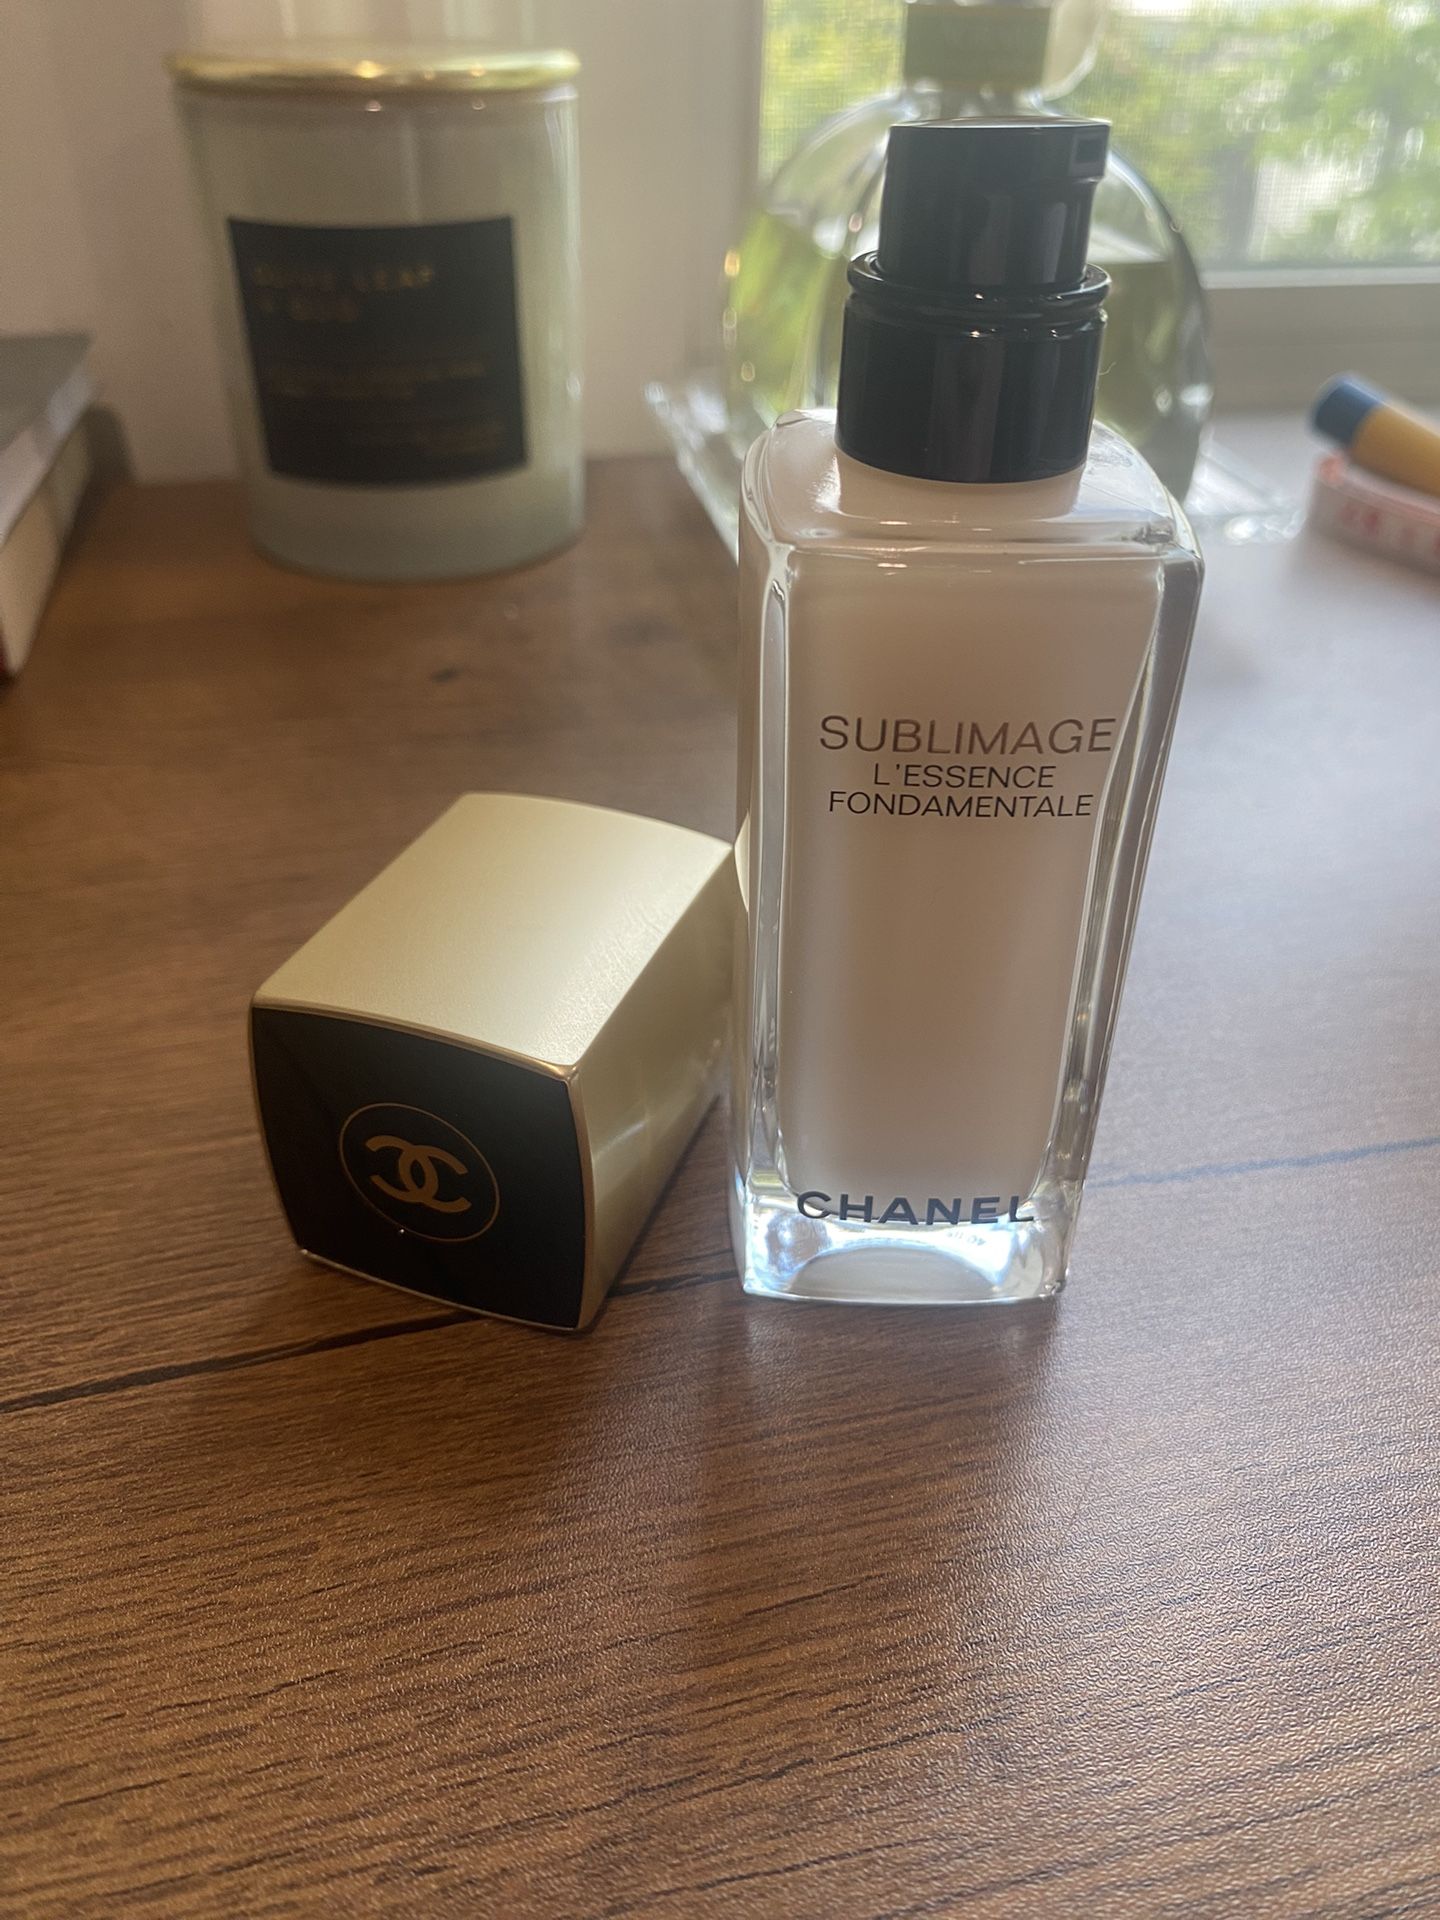 Chanel L'essence Fundamentale Makeup Foundation Brand for Sale in San Francisco, CA - OfferUp